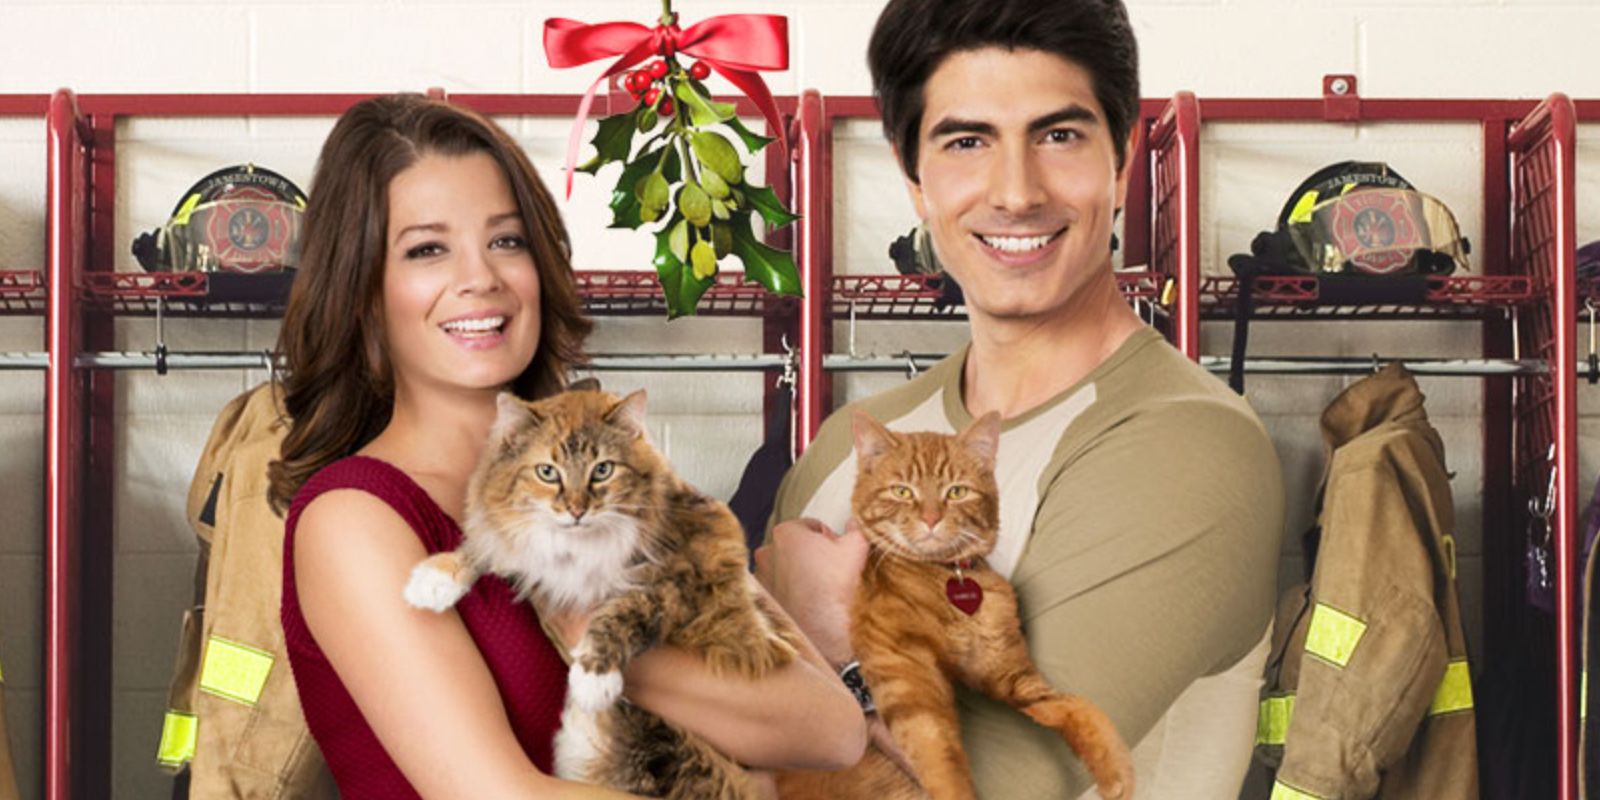 Kimberly Sustad and Brandon Routh in a promotional image with two cats for The Nine Lives Of Christmas